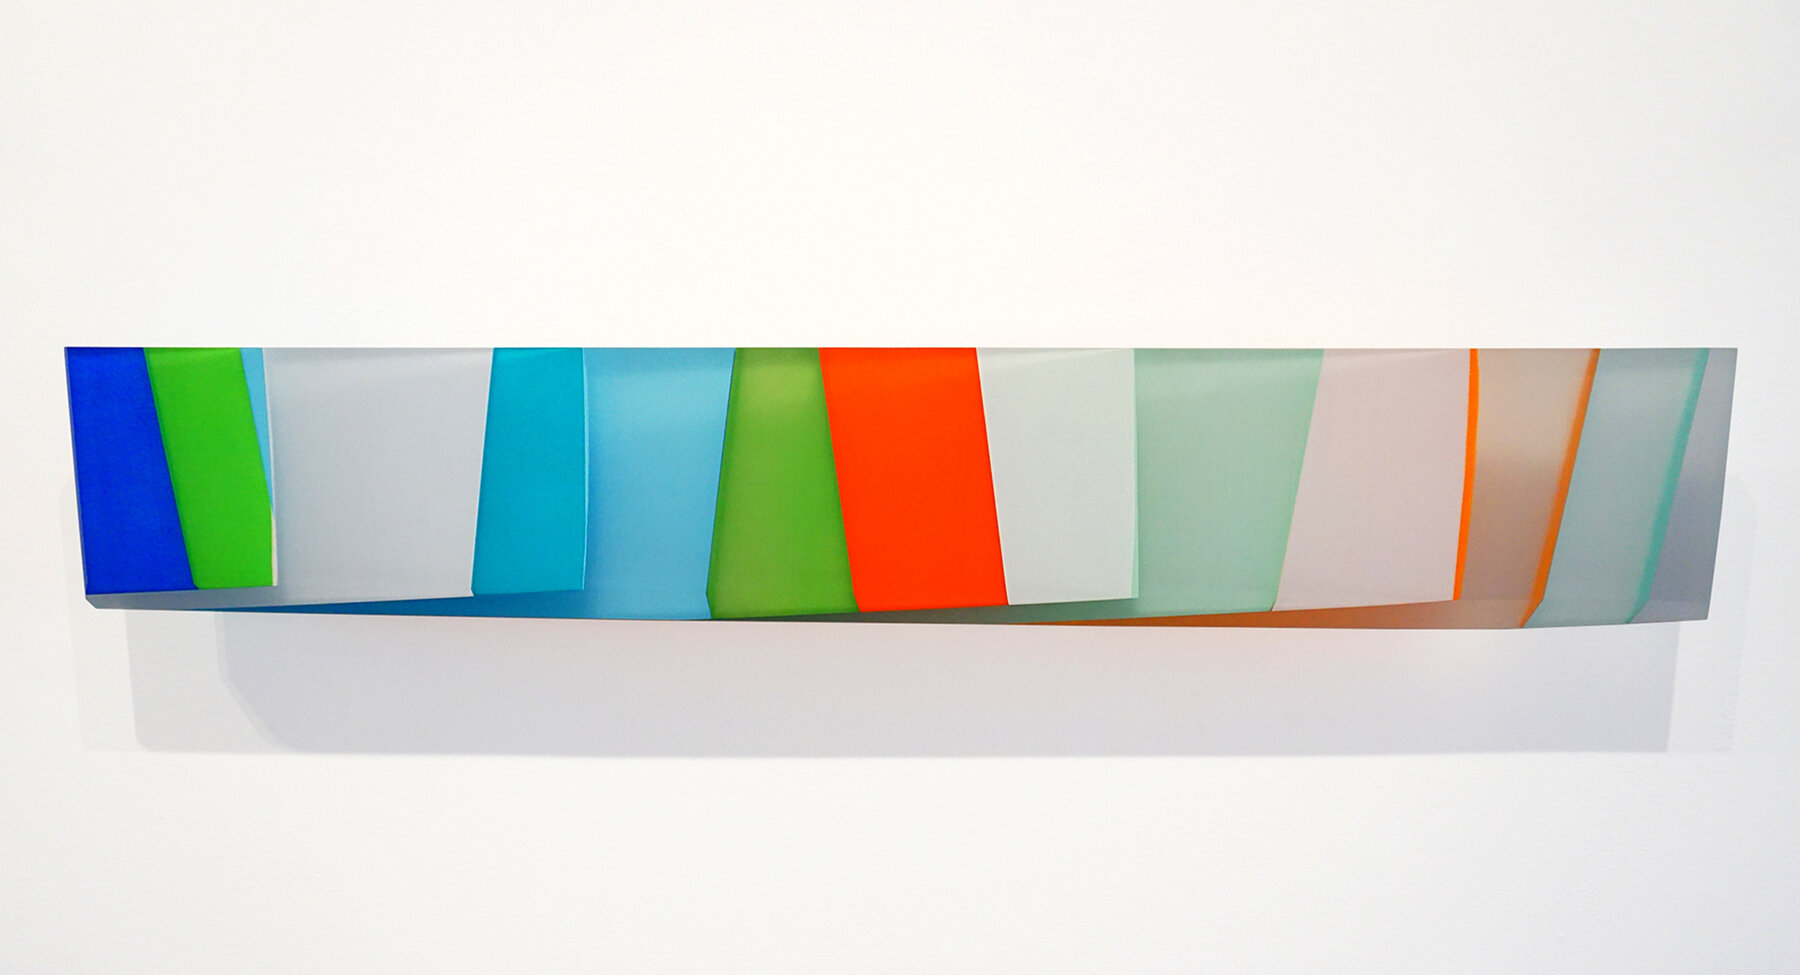 Retrofitted Sky Shim, 8 x 48.75 inches / 20.3 x 123.8 cm, mixed media on hand cut Lucite, 2019